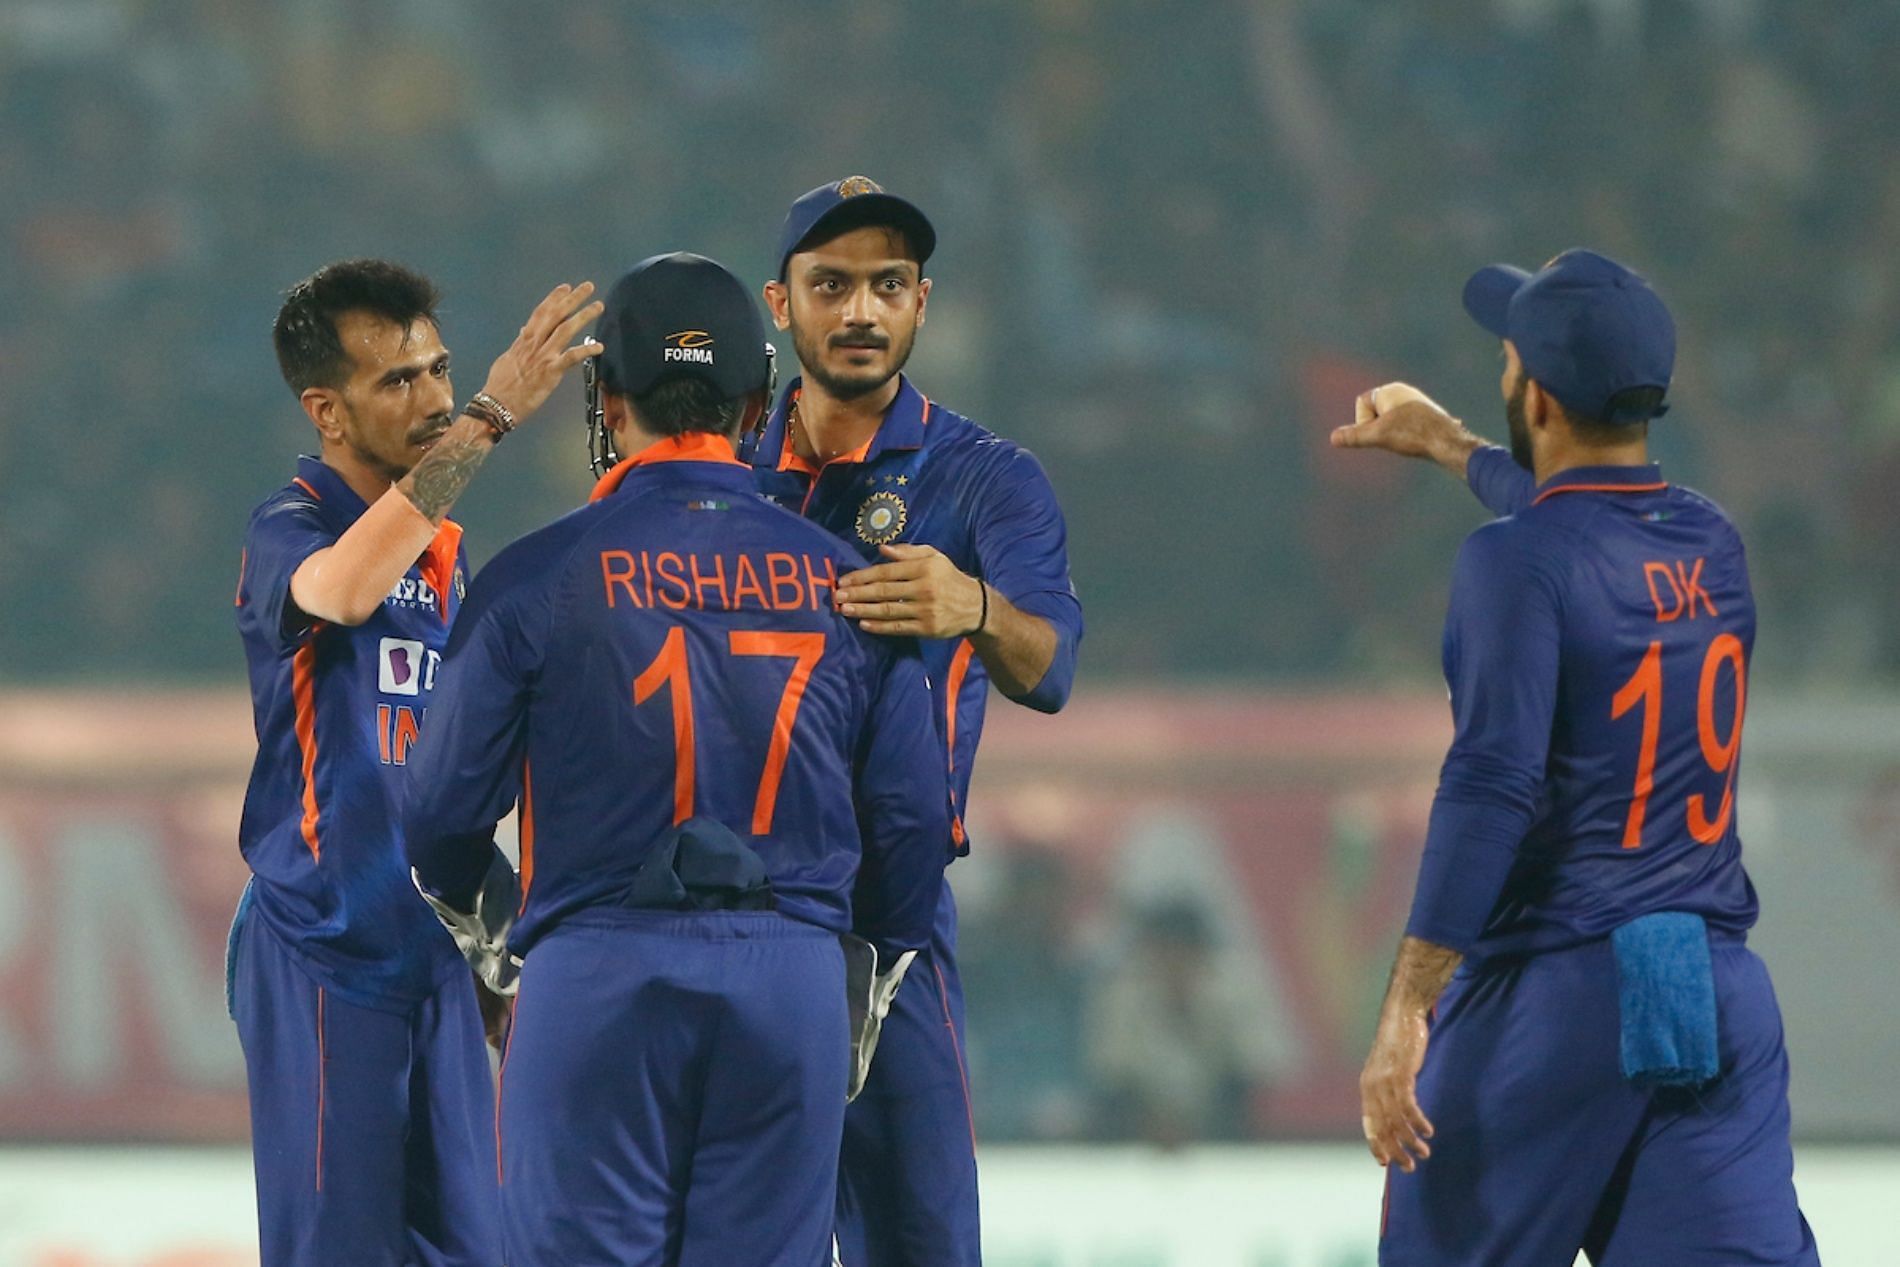 Indian players celebrate a wicket. Pic: BCCI